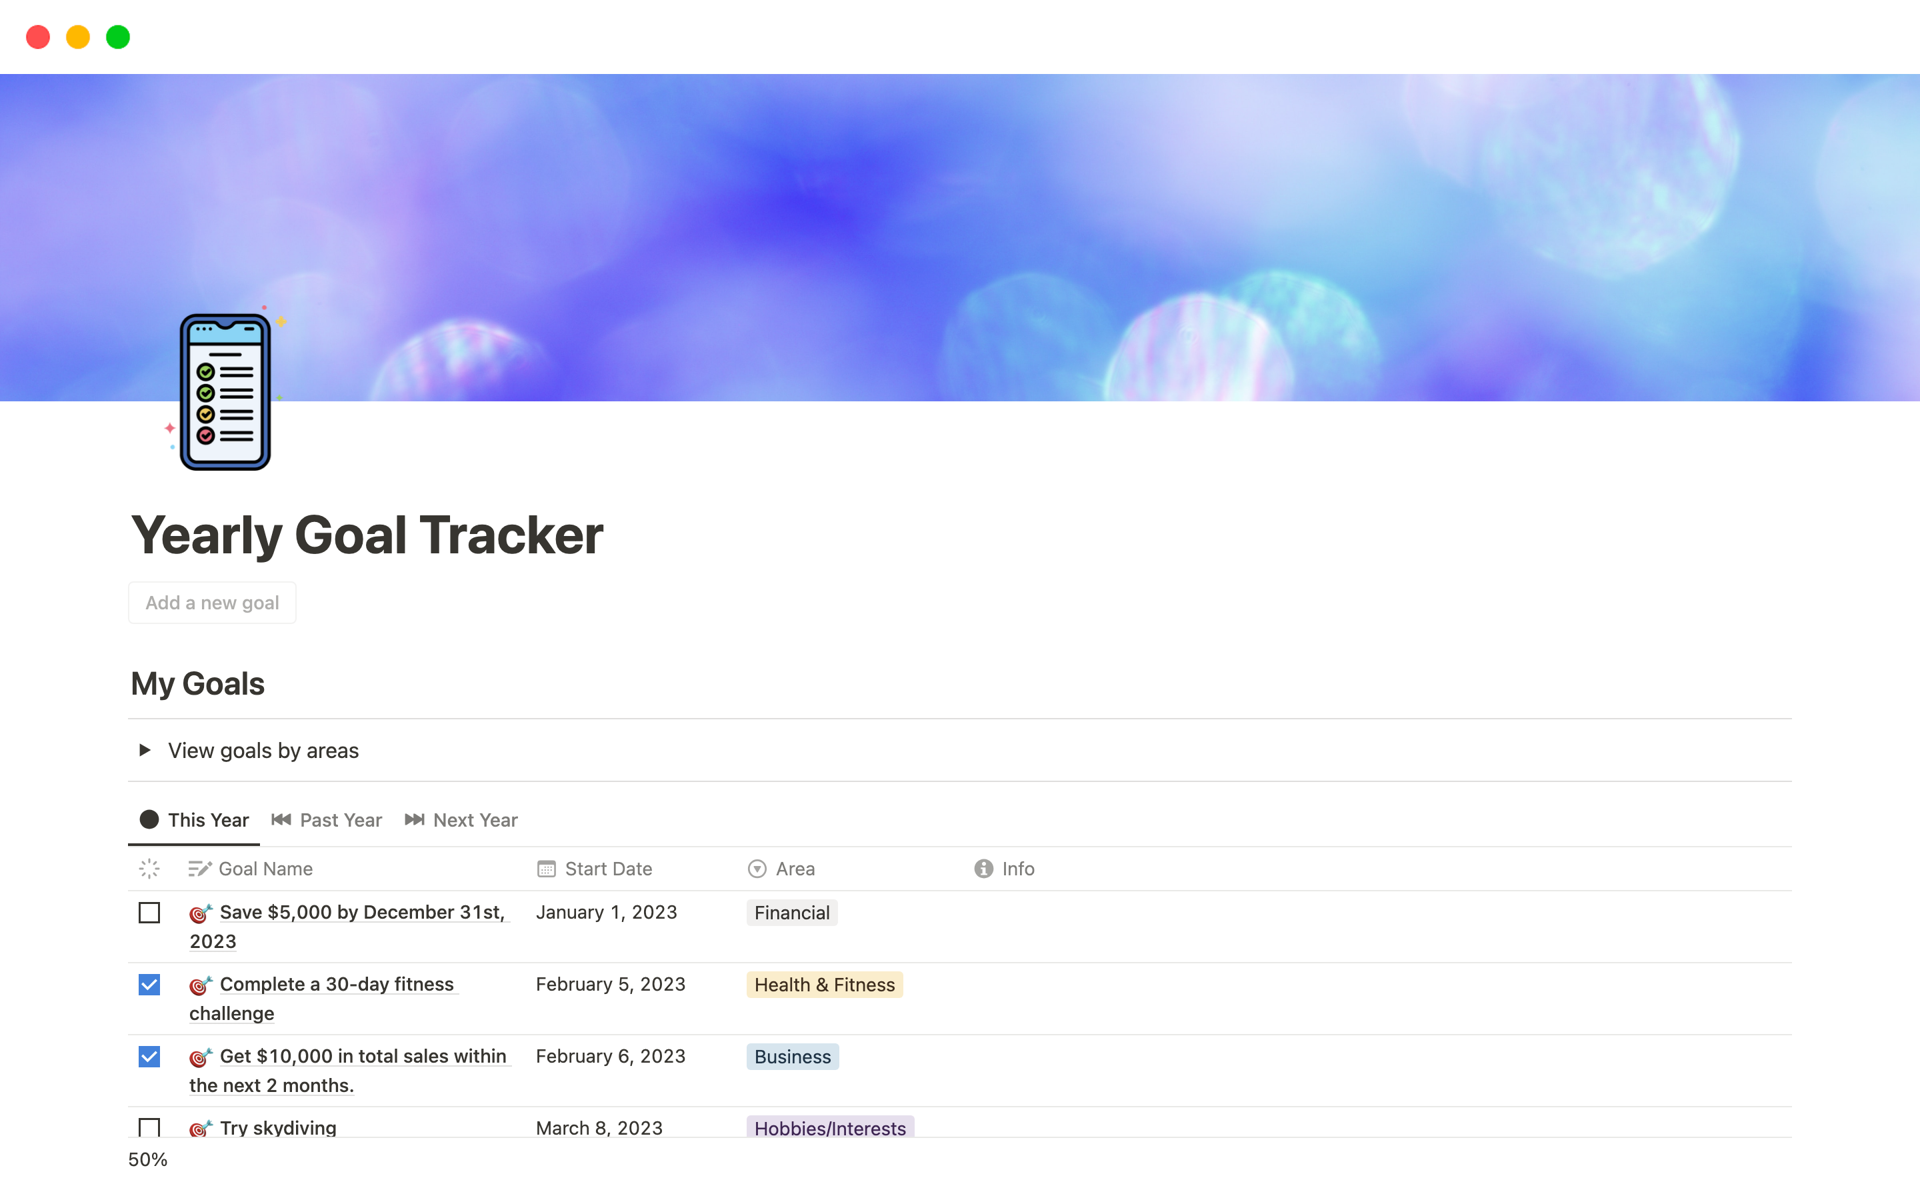 The Yearly Goal Tracker is a comprehensive Notion template designed to help you set and track your yearly goals.